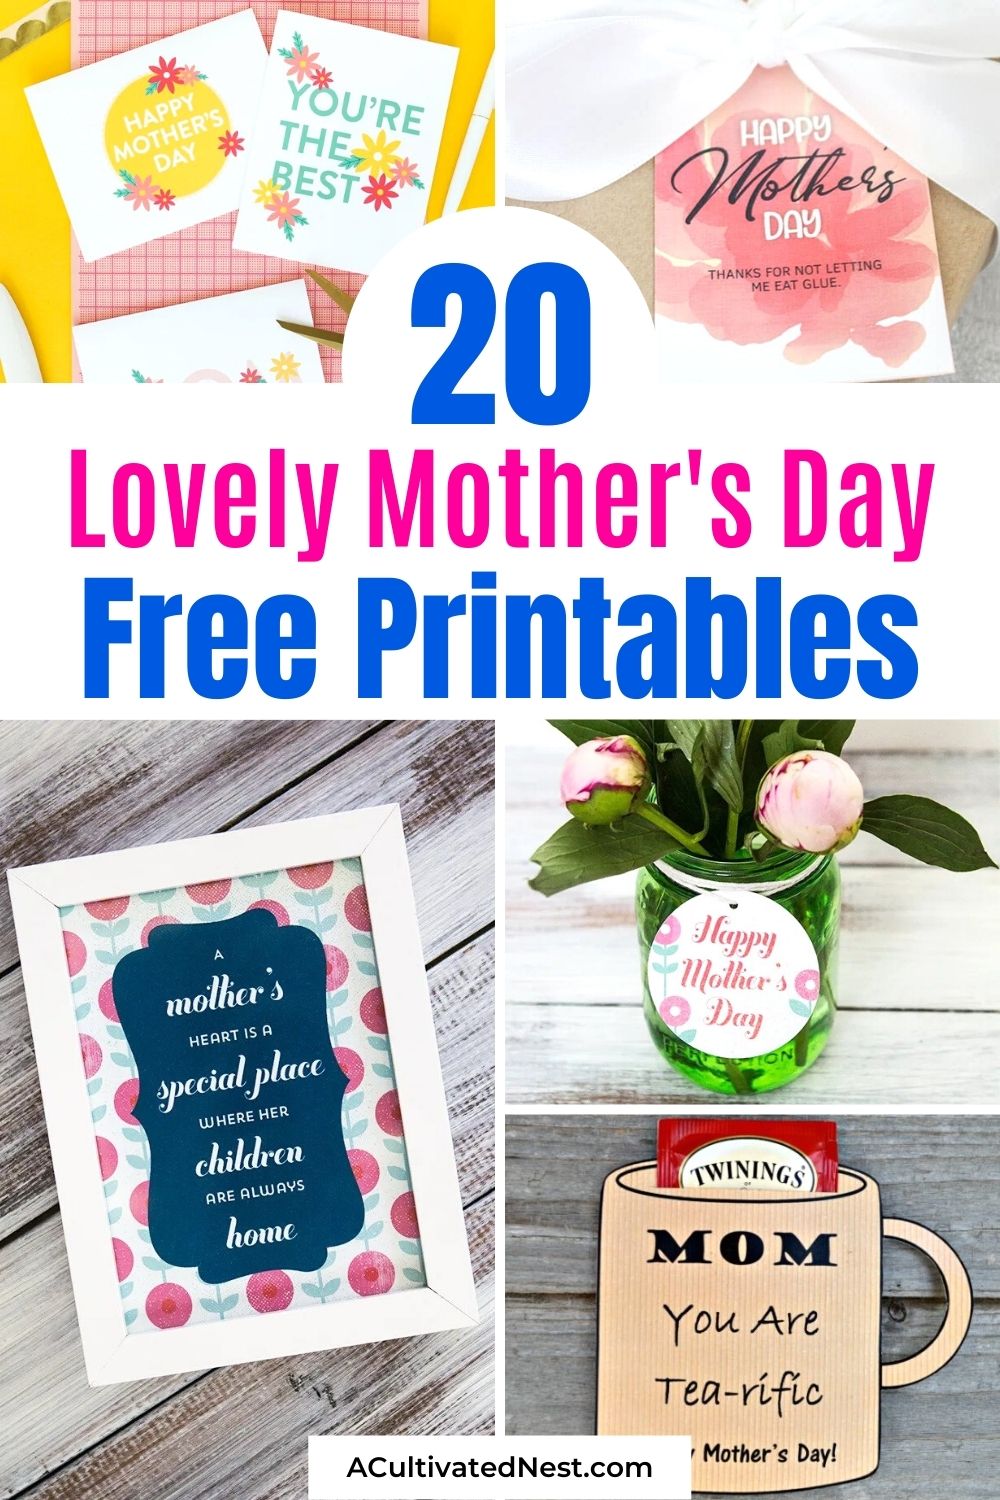 20 Lovely Mother's Day Free Printables- If you want to make this year's Mother's Day extra special, you'll love these 20 Mother's Day free printables! Gift tags, décor, and more are included! | #MothersDay #diyGifts #freePrintables #giftTags #ACultivatedNest